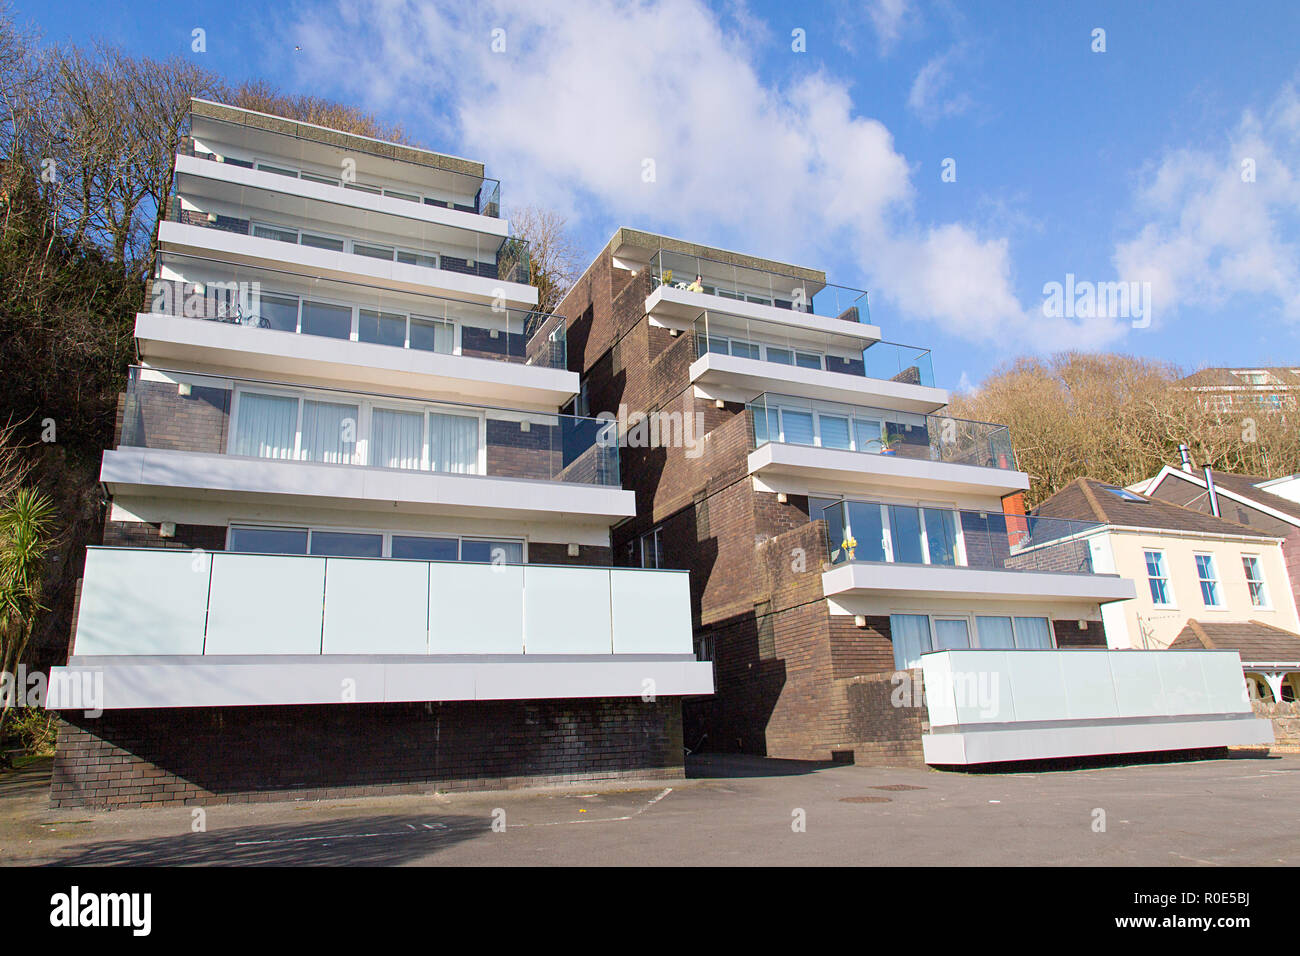 Swansea, UK: February 20, 2018: Retro 1970's designed apartment building with glass balconies to admire the view. Stock Photo